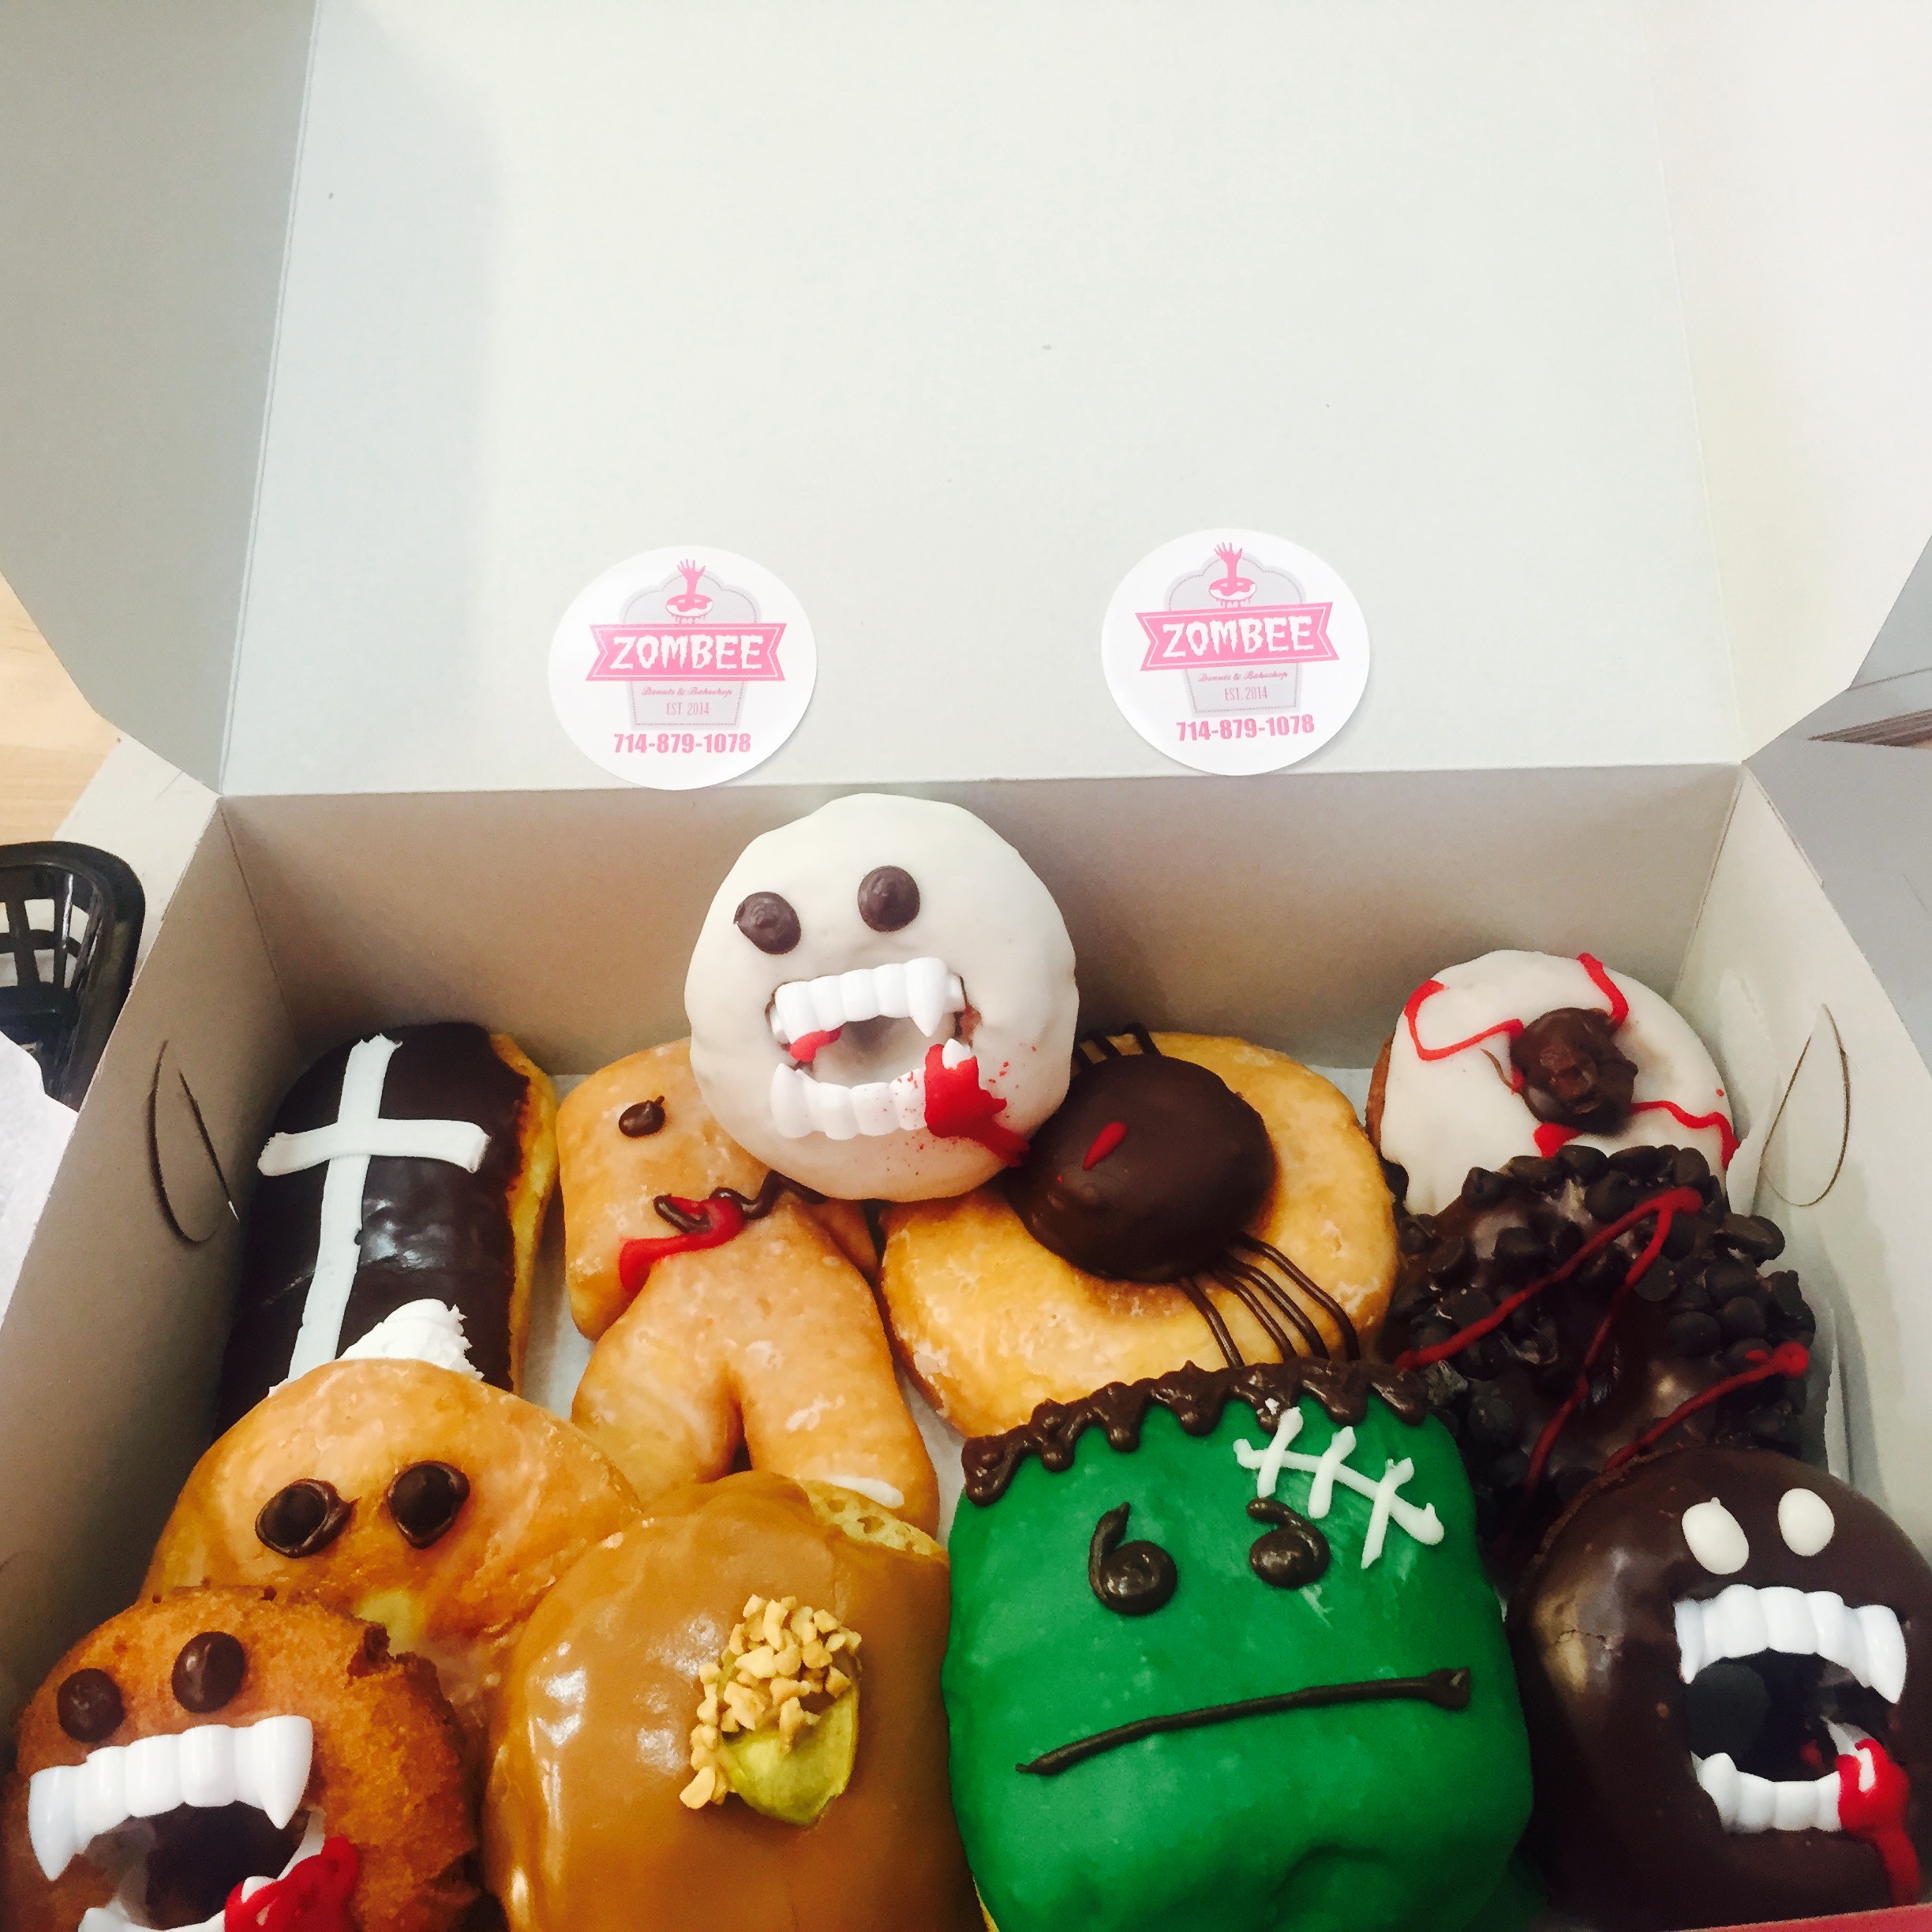 Treats are scary enticing at Zombee Donuts & Bakeshop in Fullerton